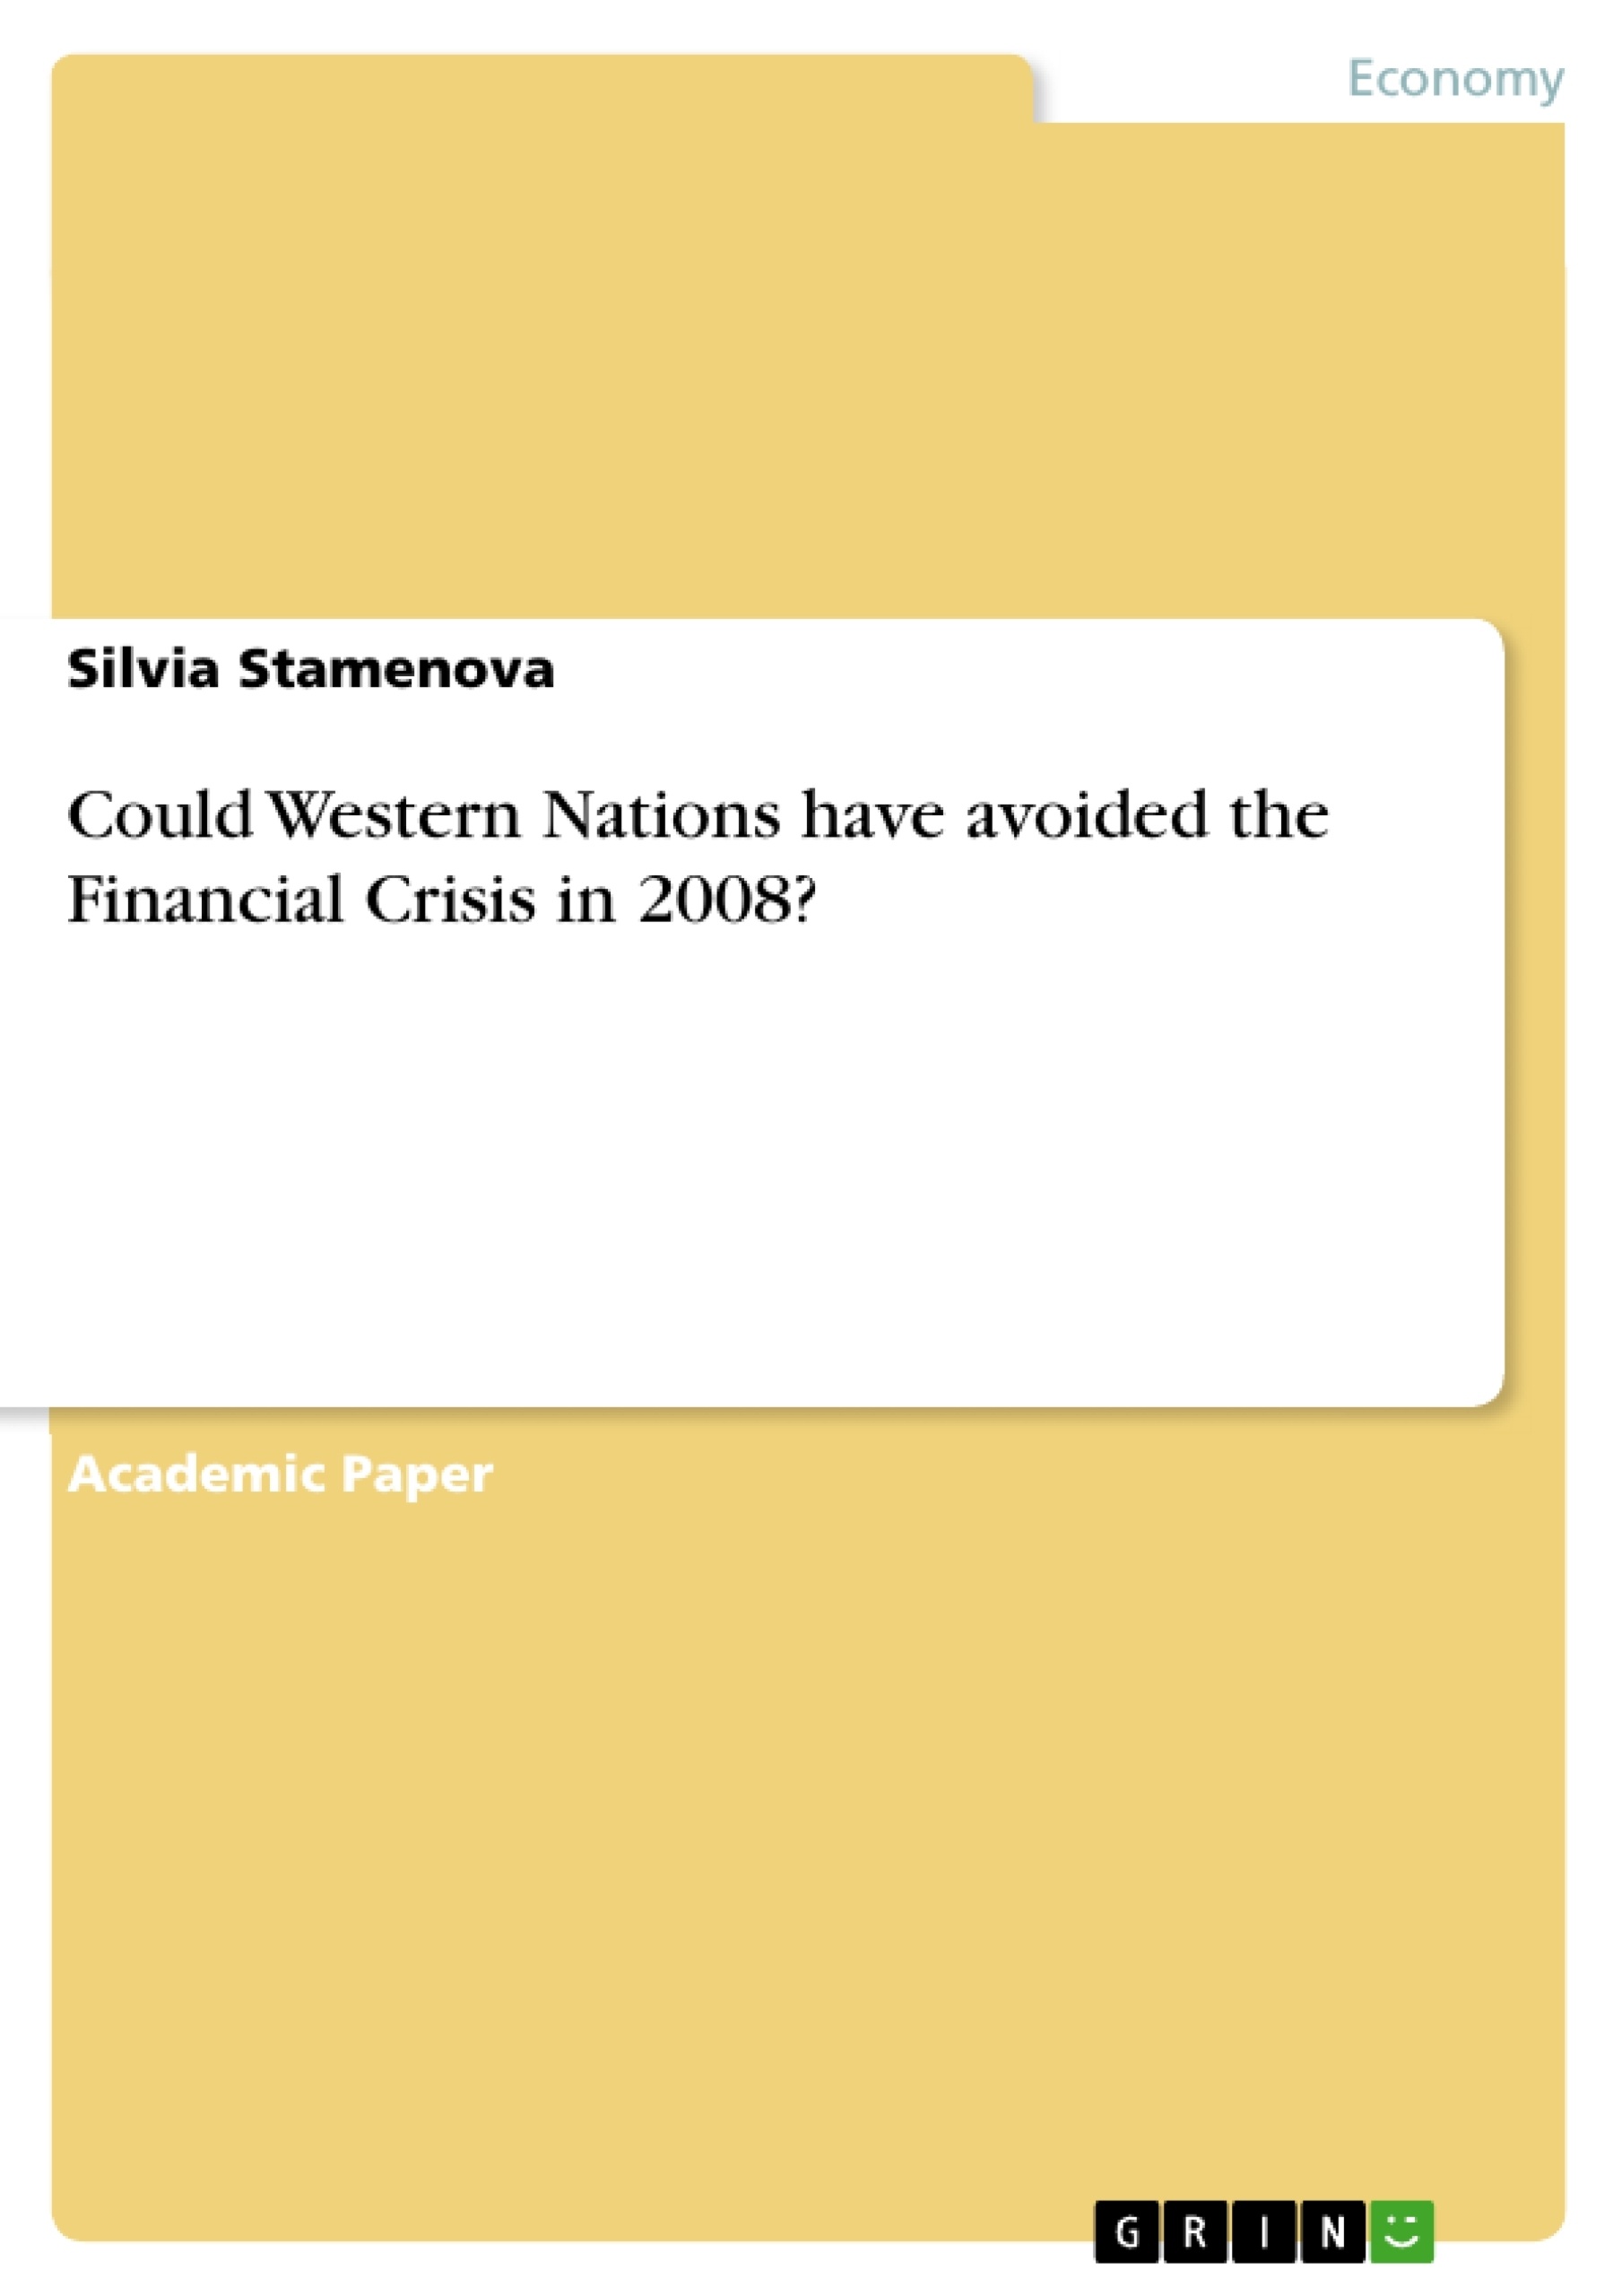 Titel: Could Western Nations have avoided the Financial Crisis in 2008?